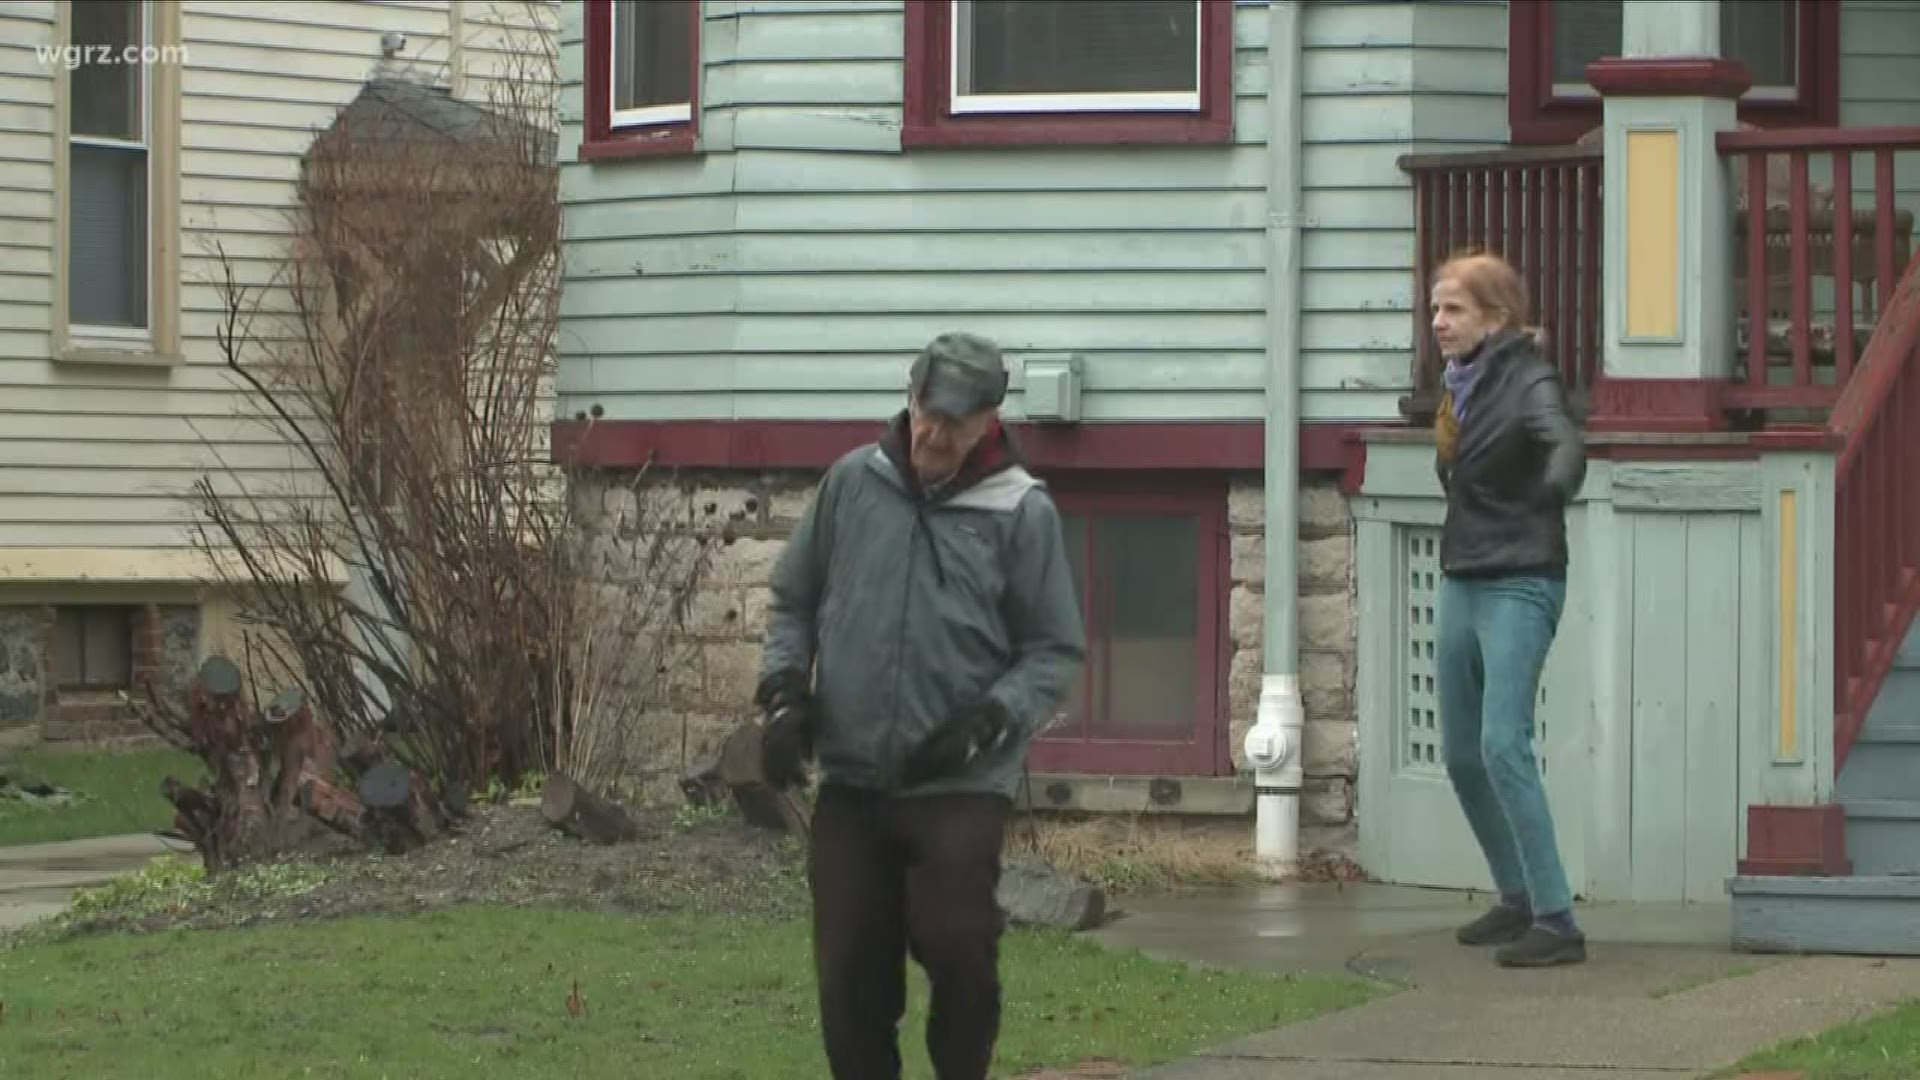 The people who live on Lexington Avenue in Buffalo are getting global attention online for their neighborhood dance parties.